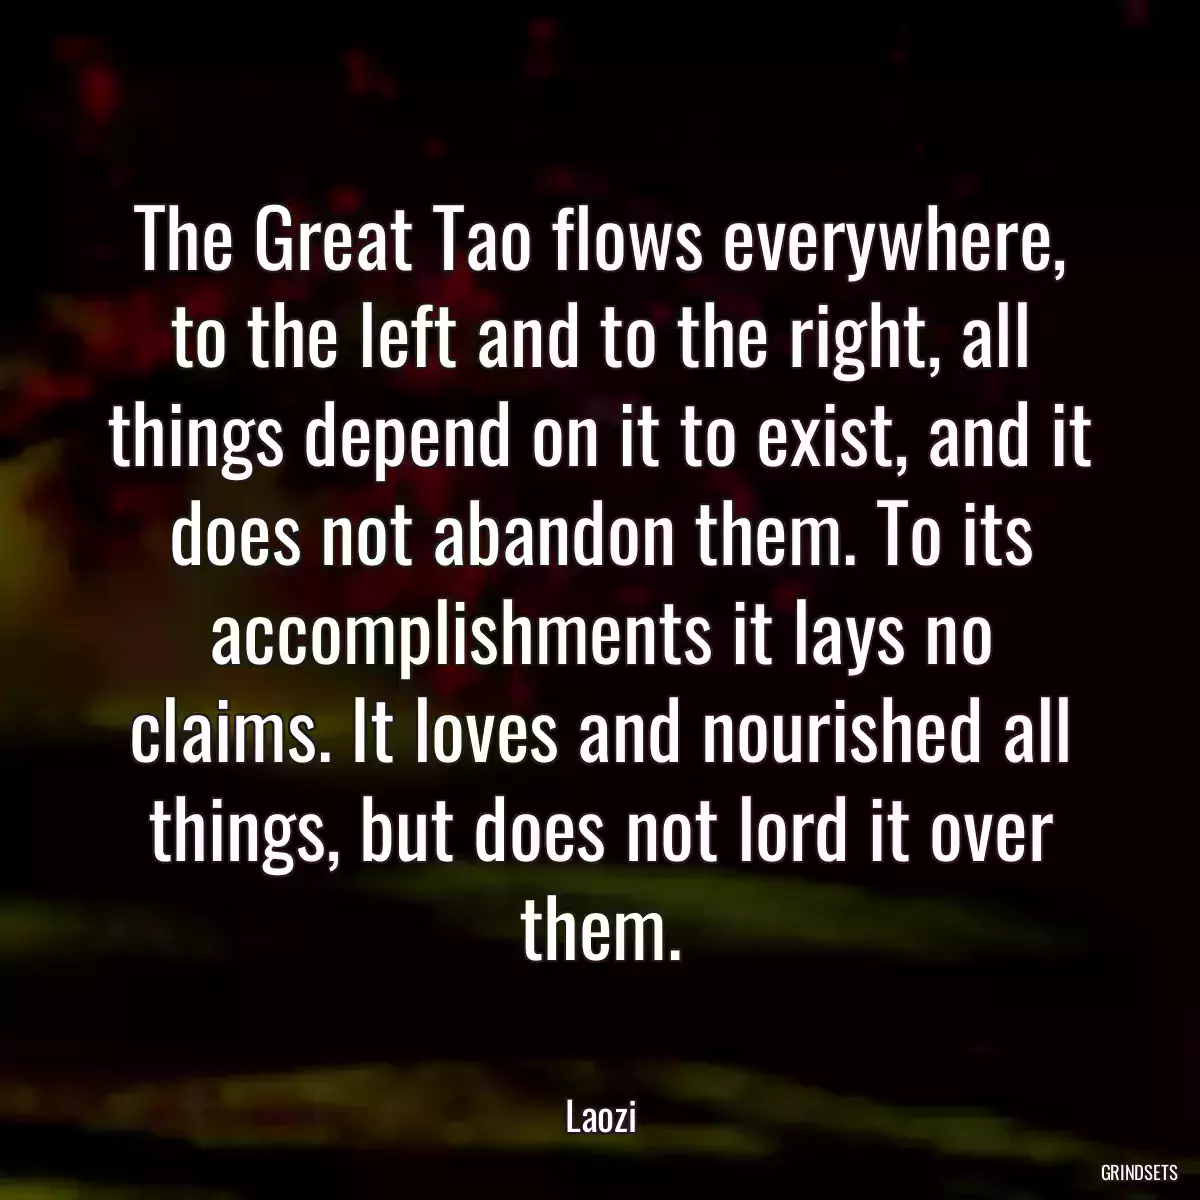 The Great Tao flows everywhere, to the left and to the right, all things depend on it to exist, and it does not abandon them. To its accomplishments it lays no claims. It loves and nourished all things, but does not lord it over them.